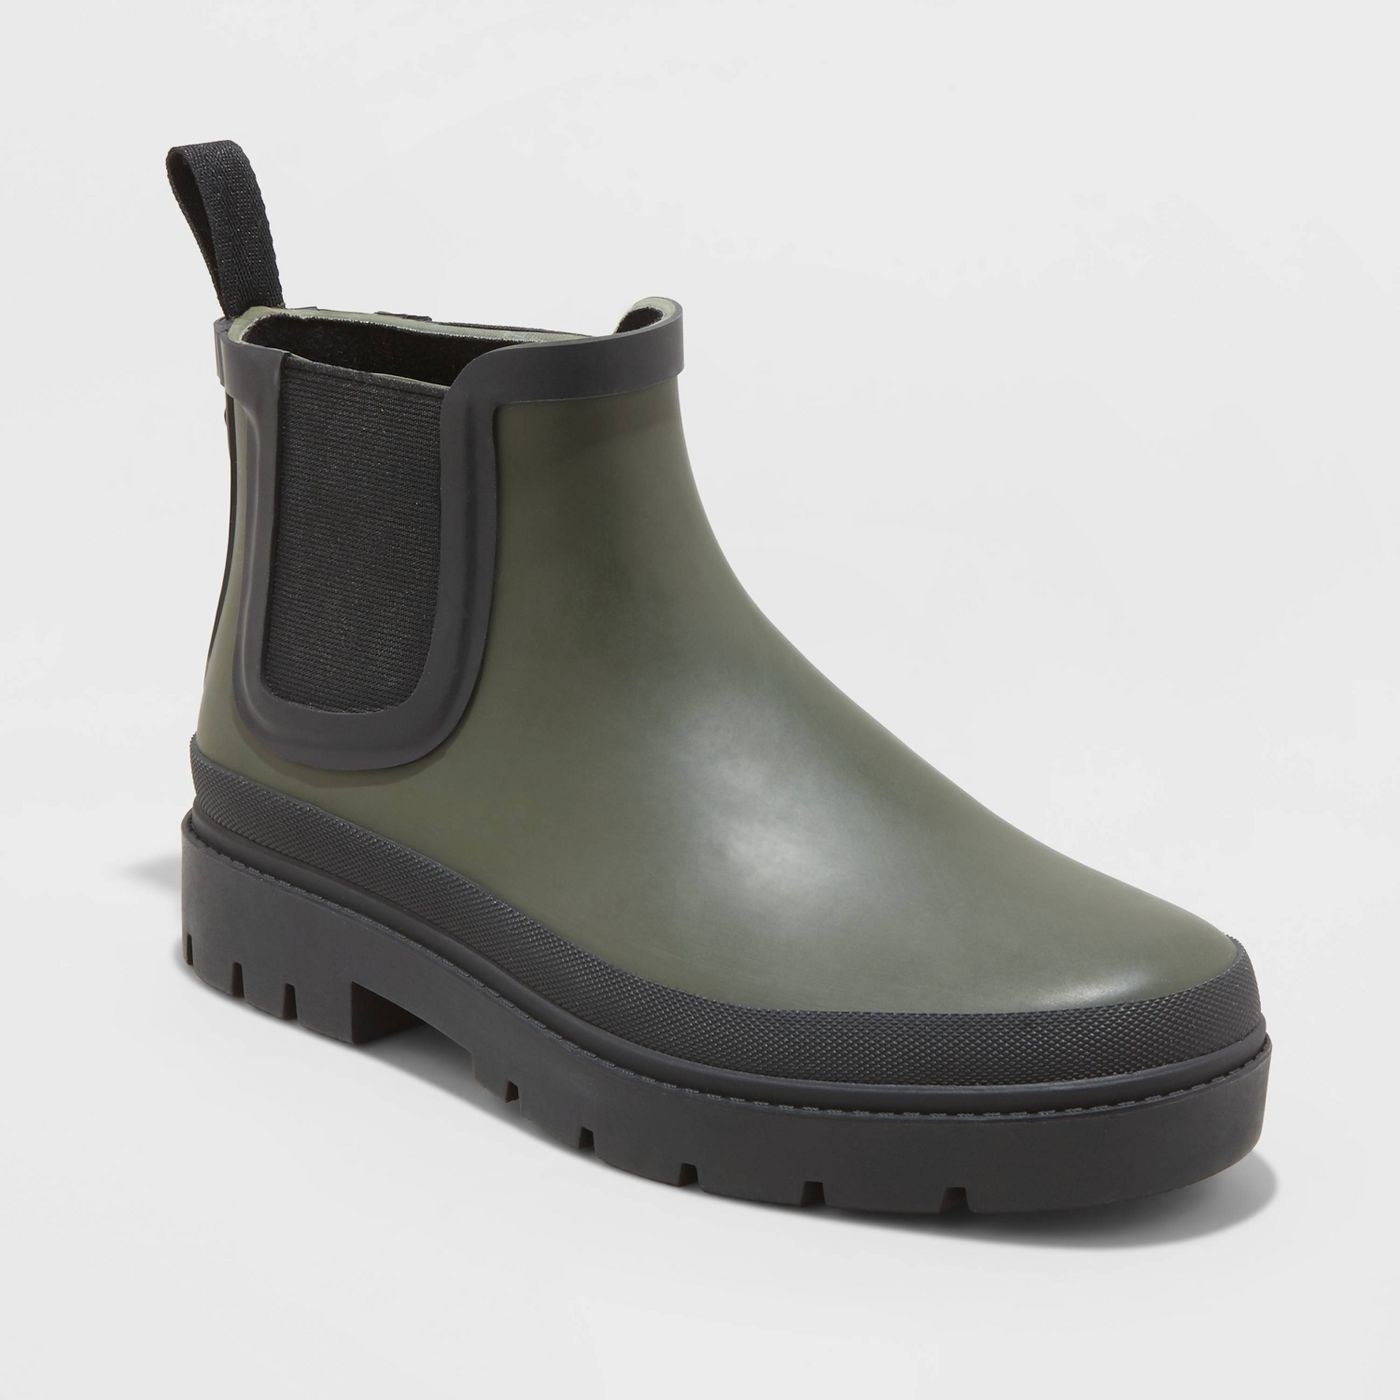 A green ankle rain boot